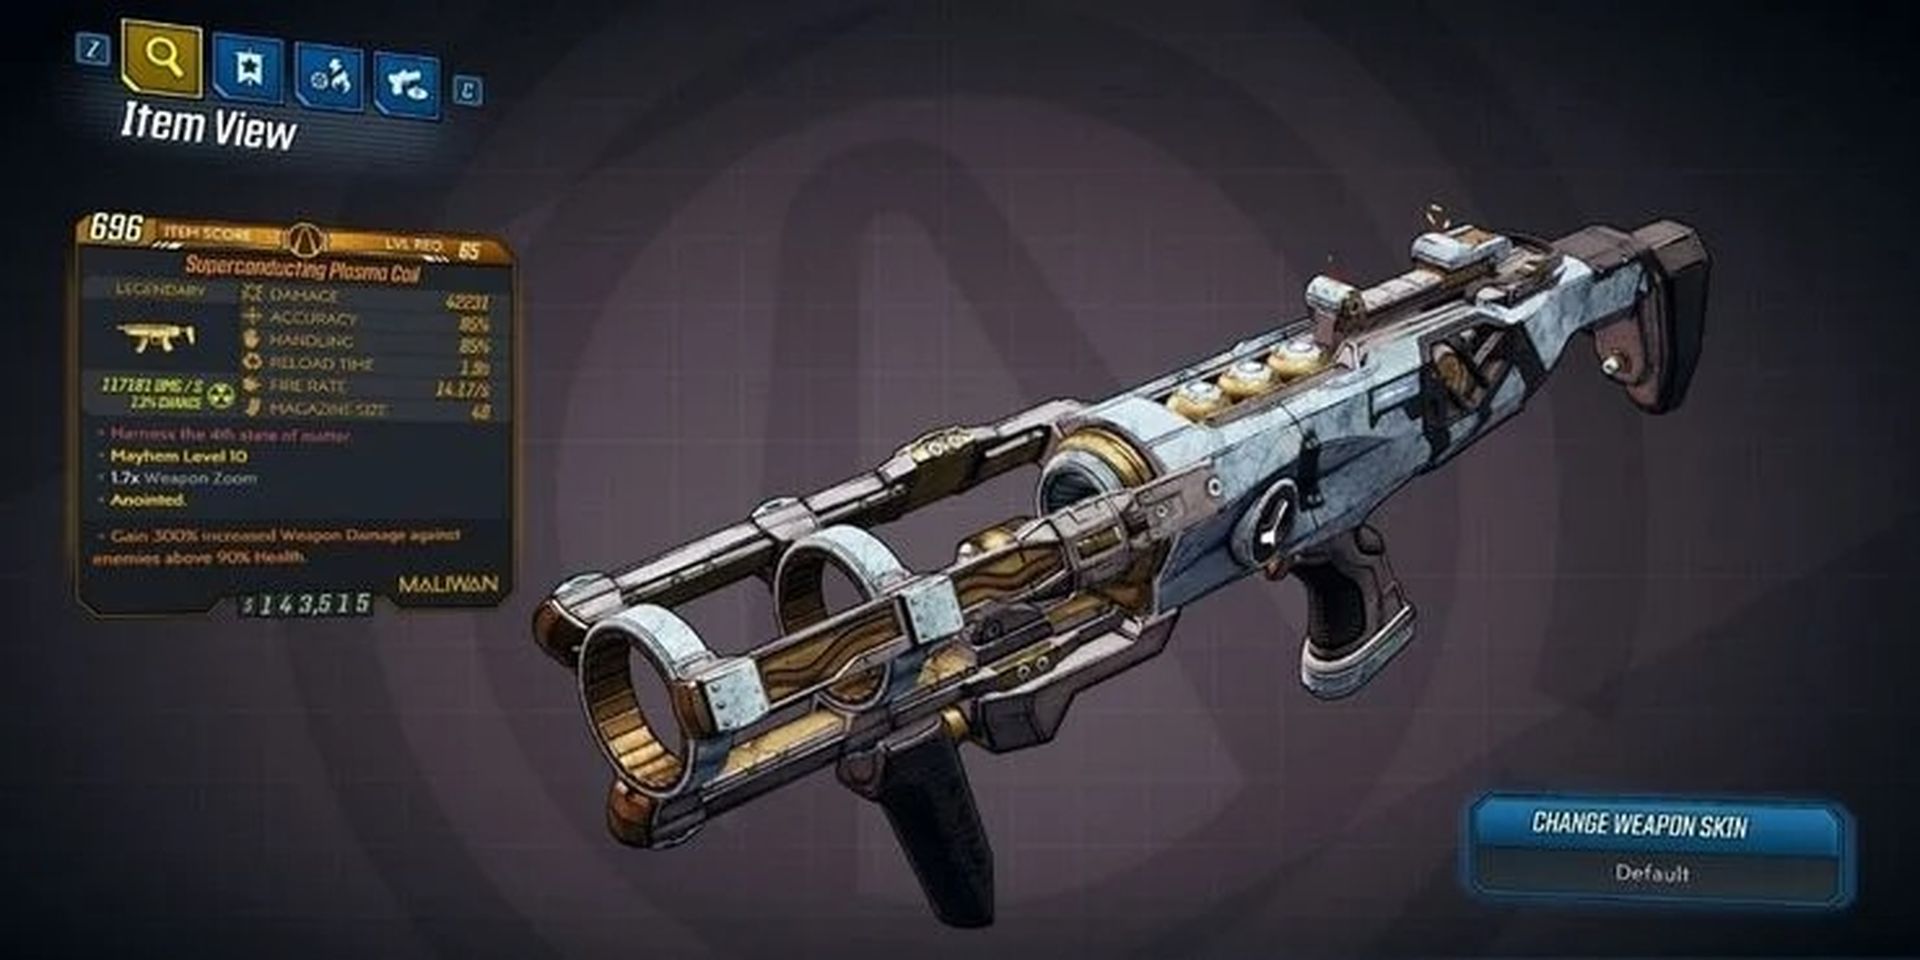 This is the best 15 legendary weapons for Borderlands 3 Mayhem 11 and Mayhem 10. This Borderlands 3 weapon tier list will help you out destroying deadly foes!